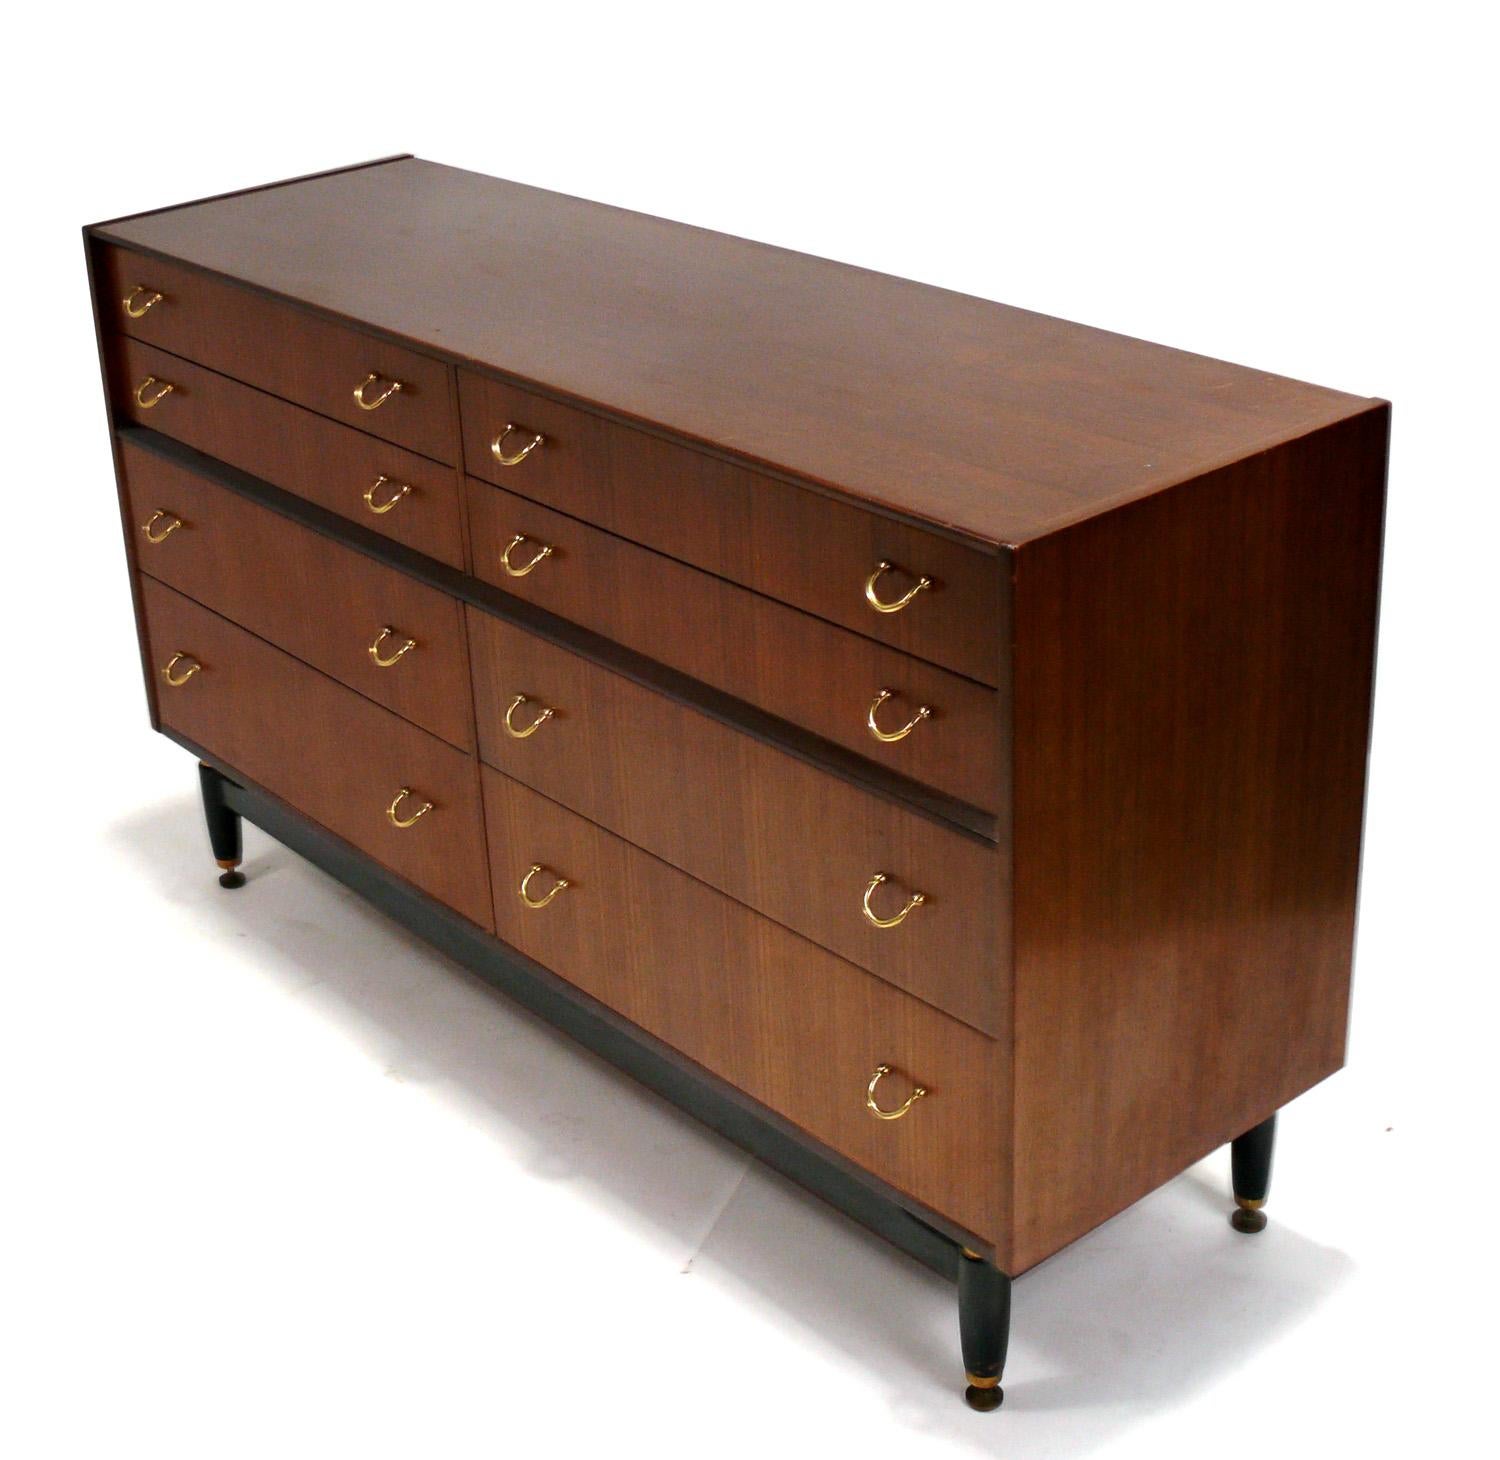 Danish Modern Style Chest or Dresser by G Plan, circa 1960s In Good Condition For Sale In Atlanta, GA